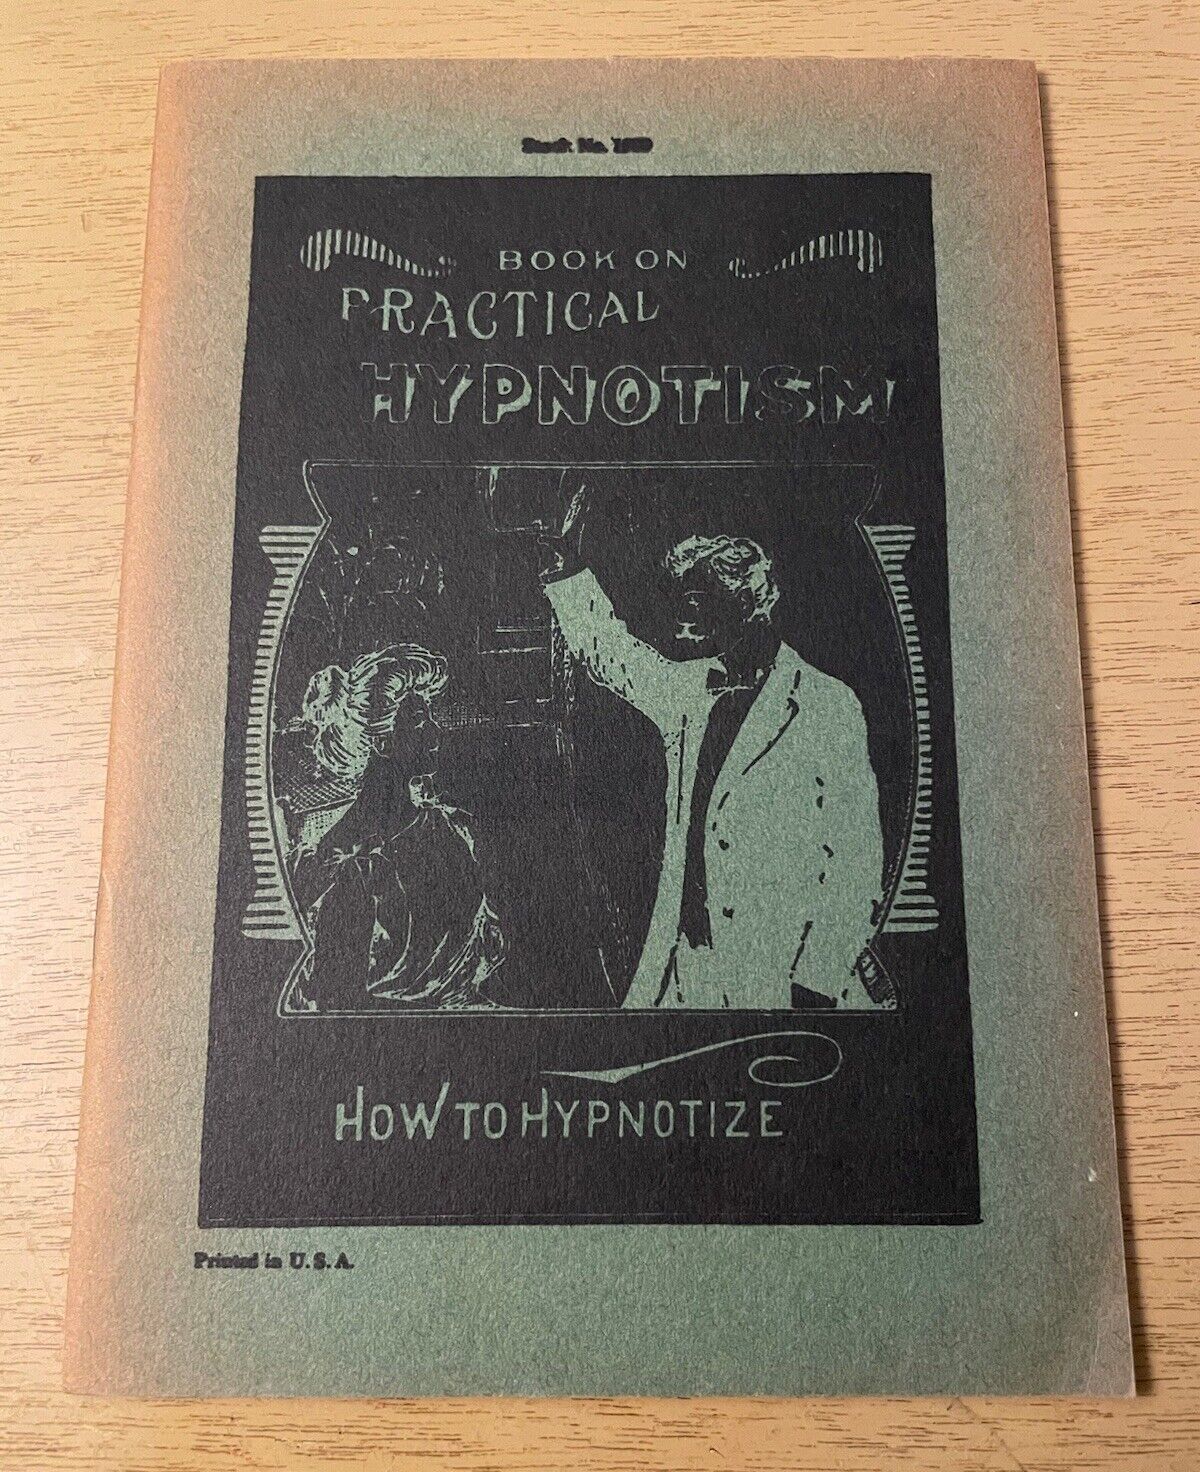 Vtg Book On Practical Hypnotism How To Hypnotize 31 Pg Softcover Booklet